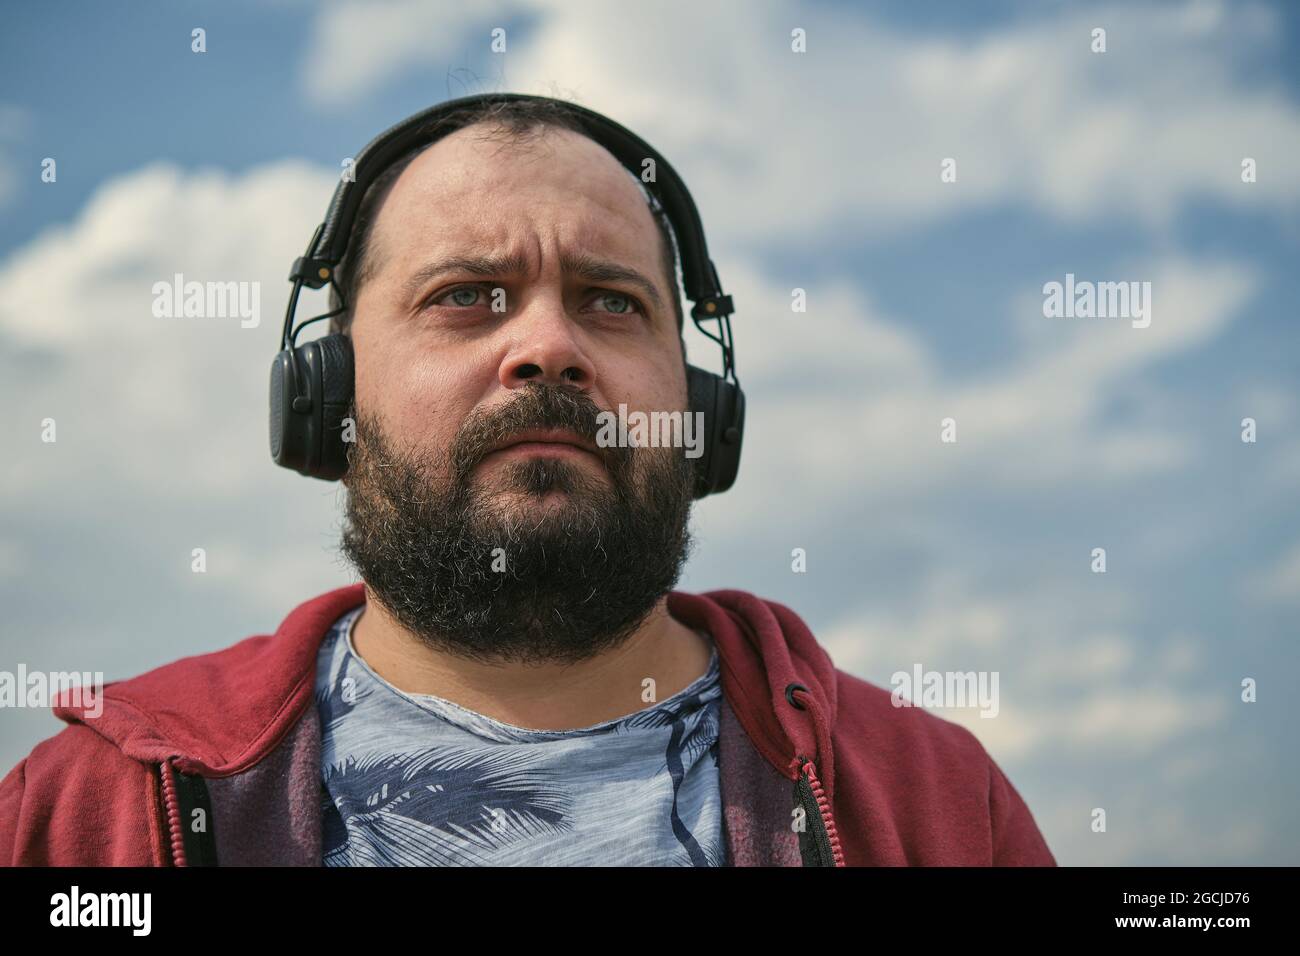 Middle-aged European man in headphones outdoors listening to music against the background of the sky Stock Photo